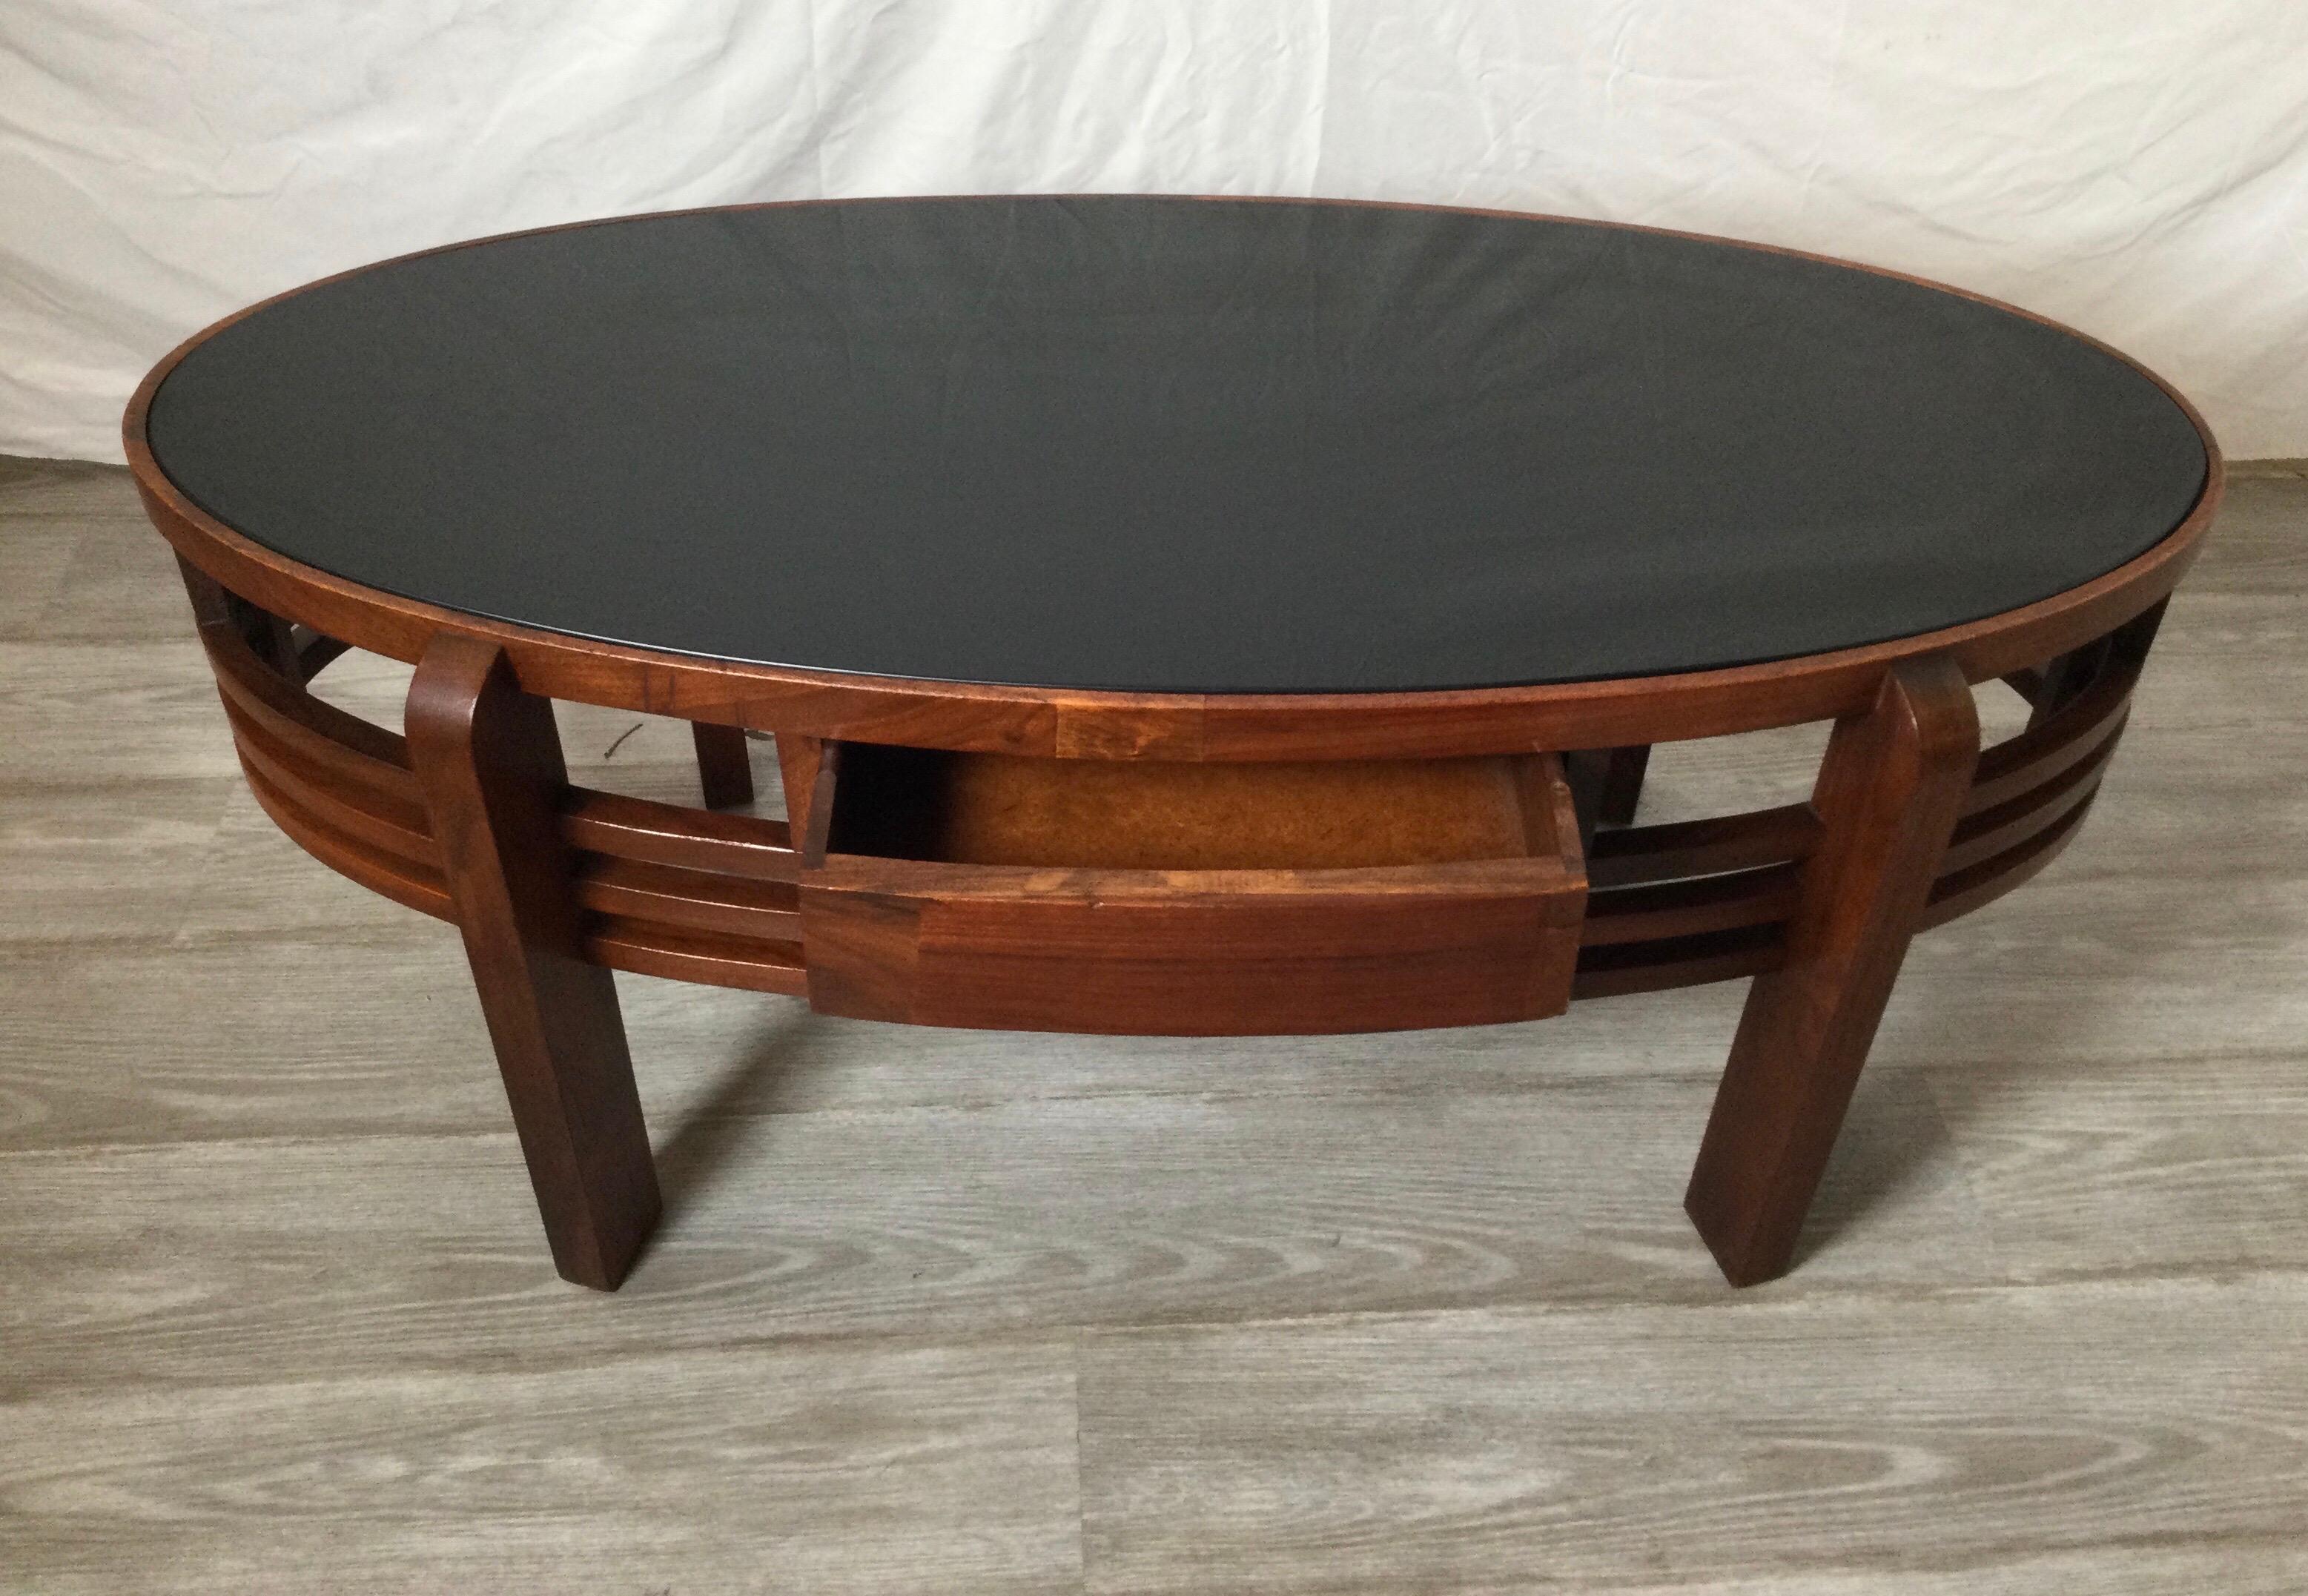 American Mid 20th Century Oval Walnut Cocktail Table with Black Glass Top